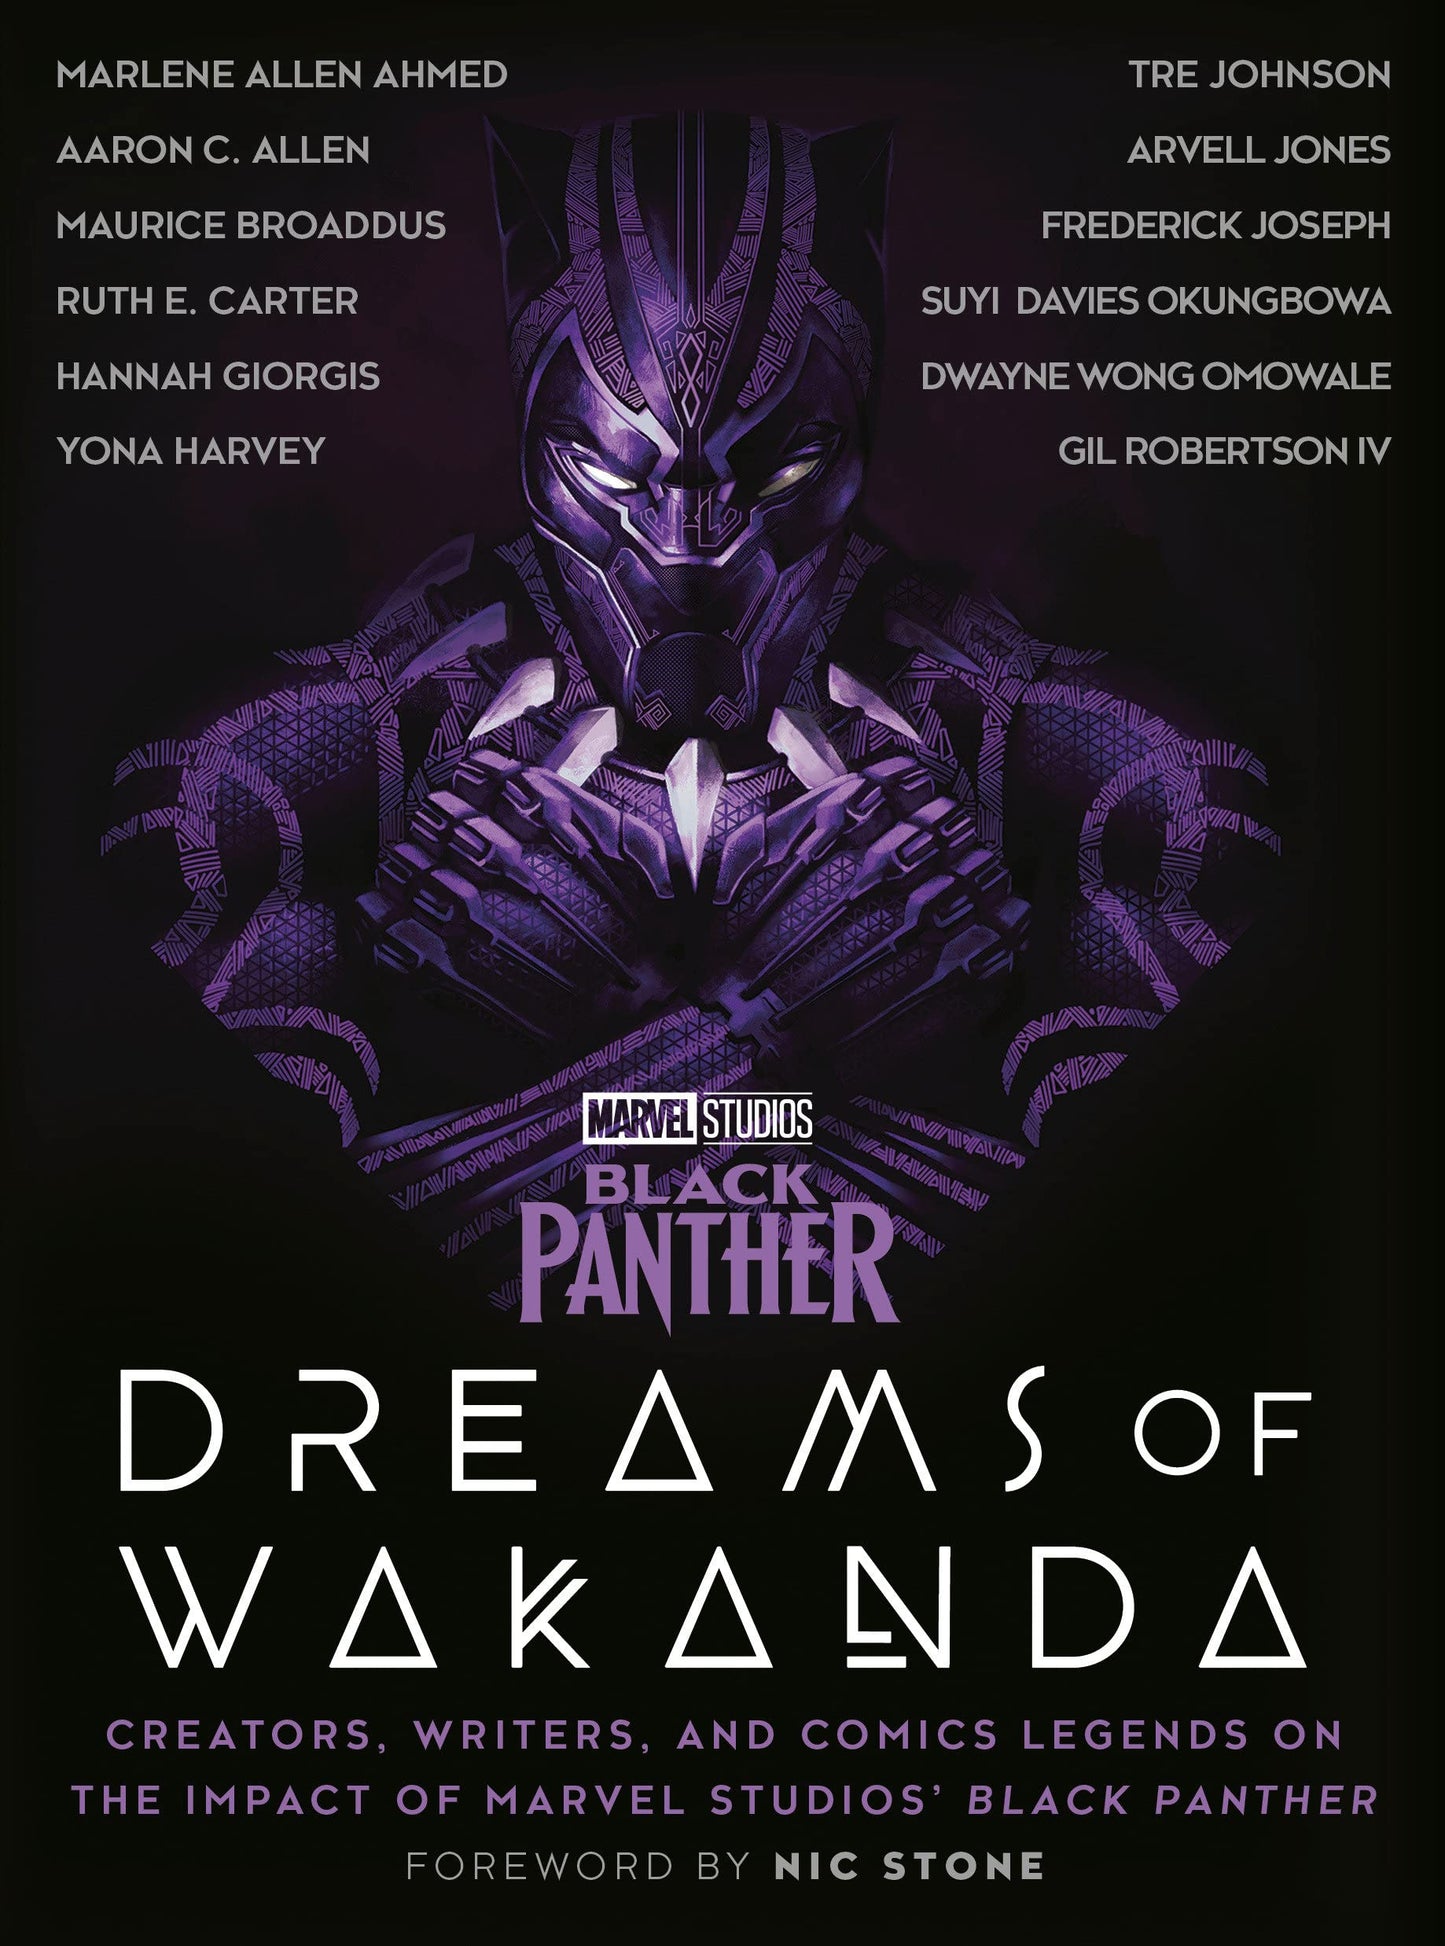 Black Panther // Dreams of Wakanda: Creators, Writers, and Comics Legends on the Impact of Marvel Studios' Black Panther